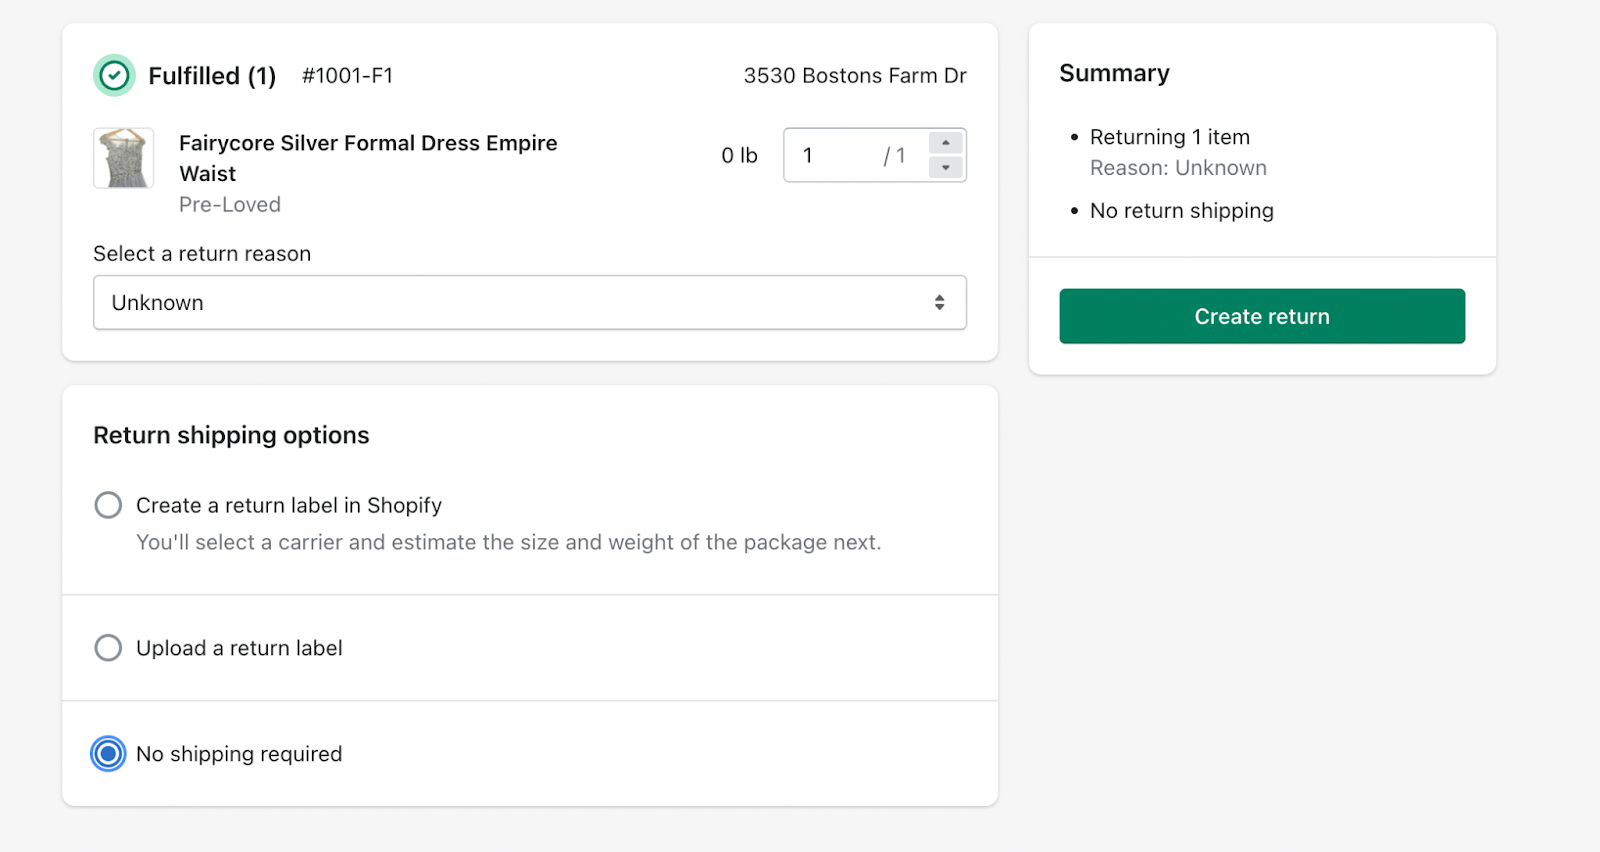 Returns can happen and Shopify gives you several options including the ability to create a return shipping label or refund the money back to the customer without returning the item.